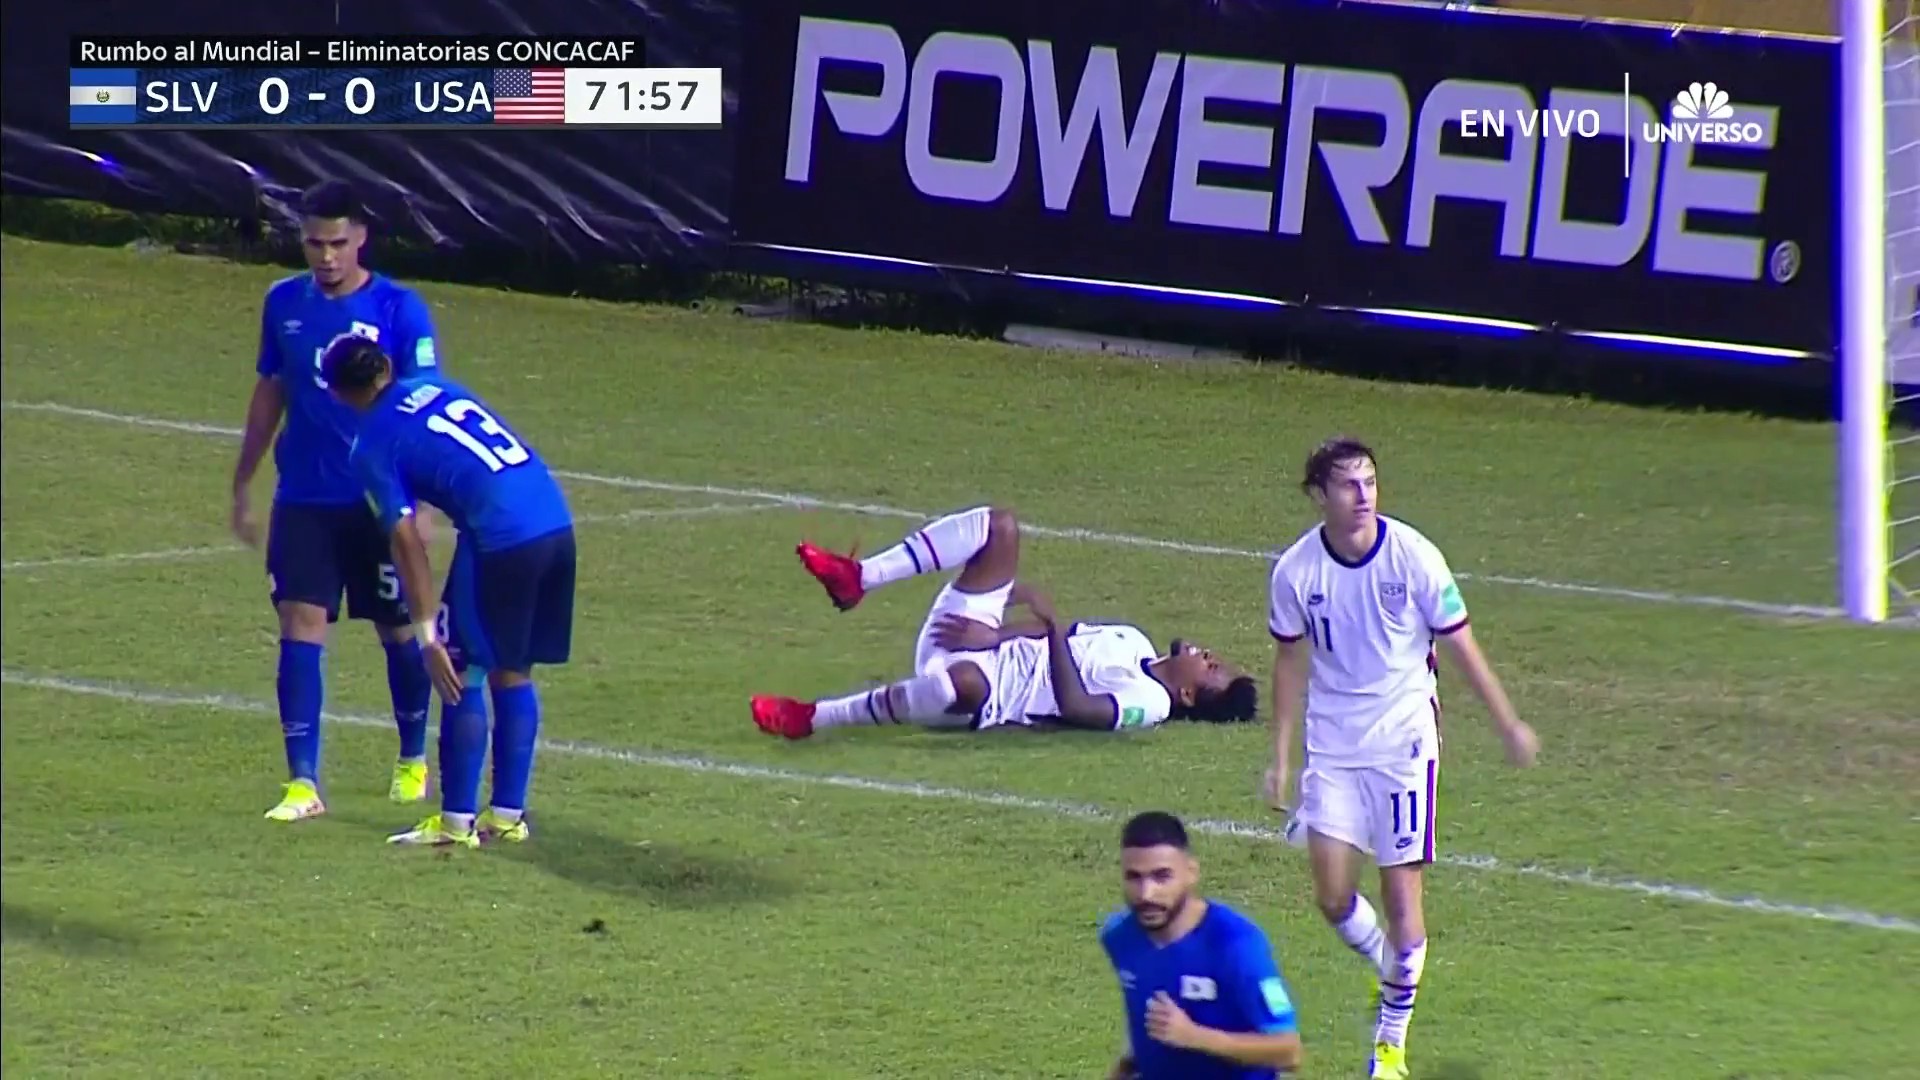 SI Soccer on X: What a golden chance for the #USMNT. Gio Reyna lofts it up  for Weston McKennie, who can't get his header down on frame. 0-0 still in  San Salvador #